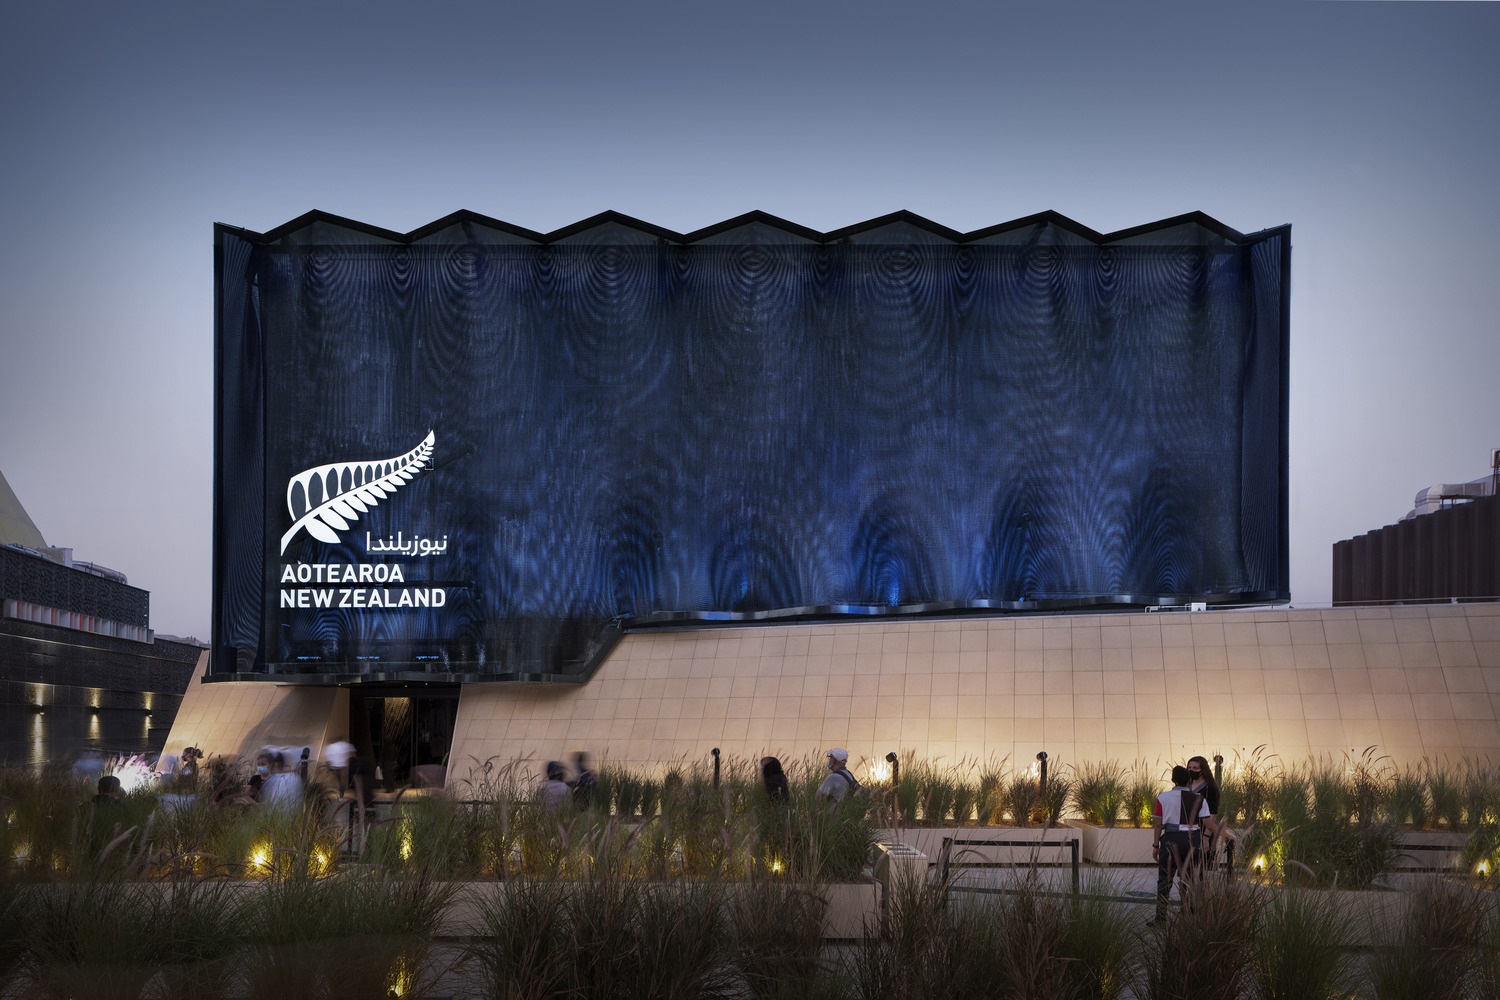 Exterior of New Zealand Pavilion at Expo 2020